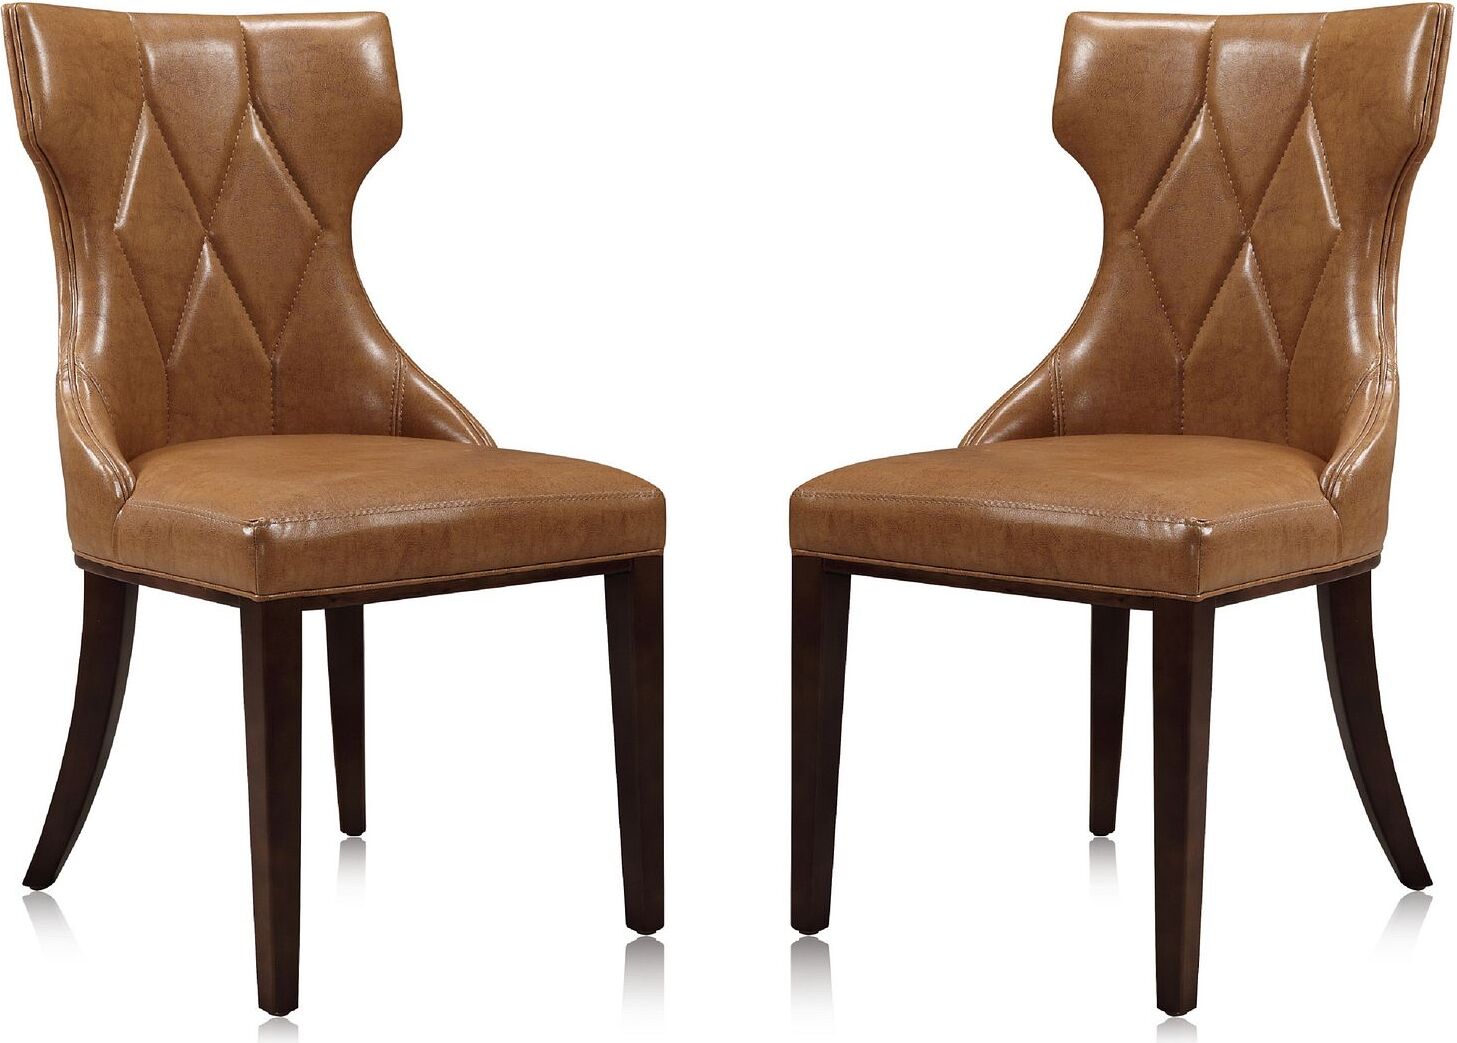 Reine Faux Leather Dining Chair Set Of, Camel Faux Leather Dining Chairs